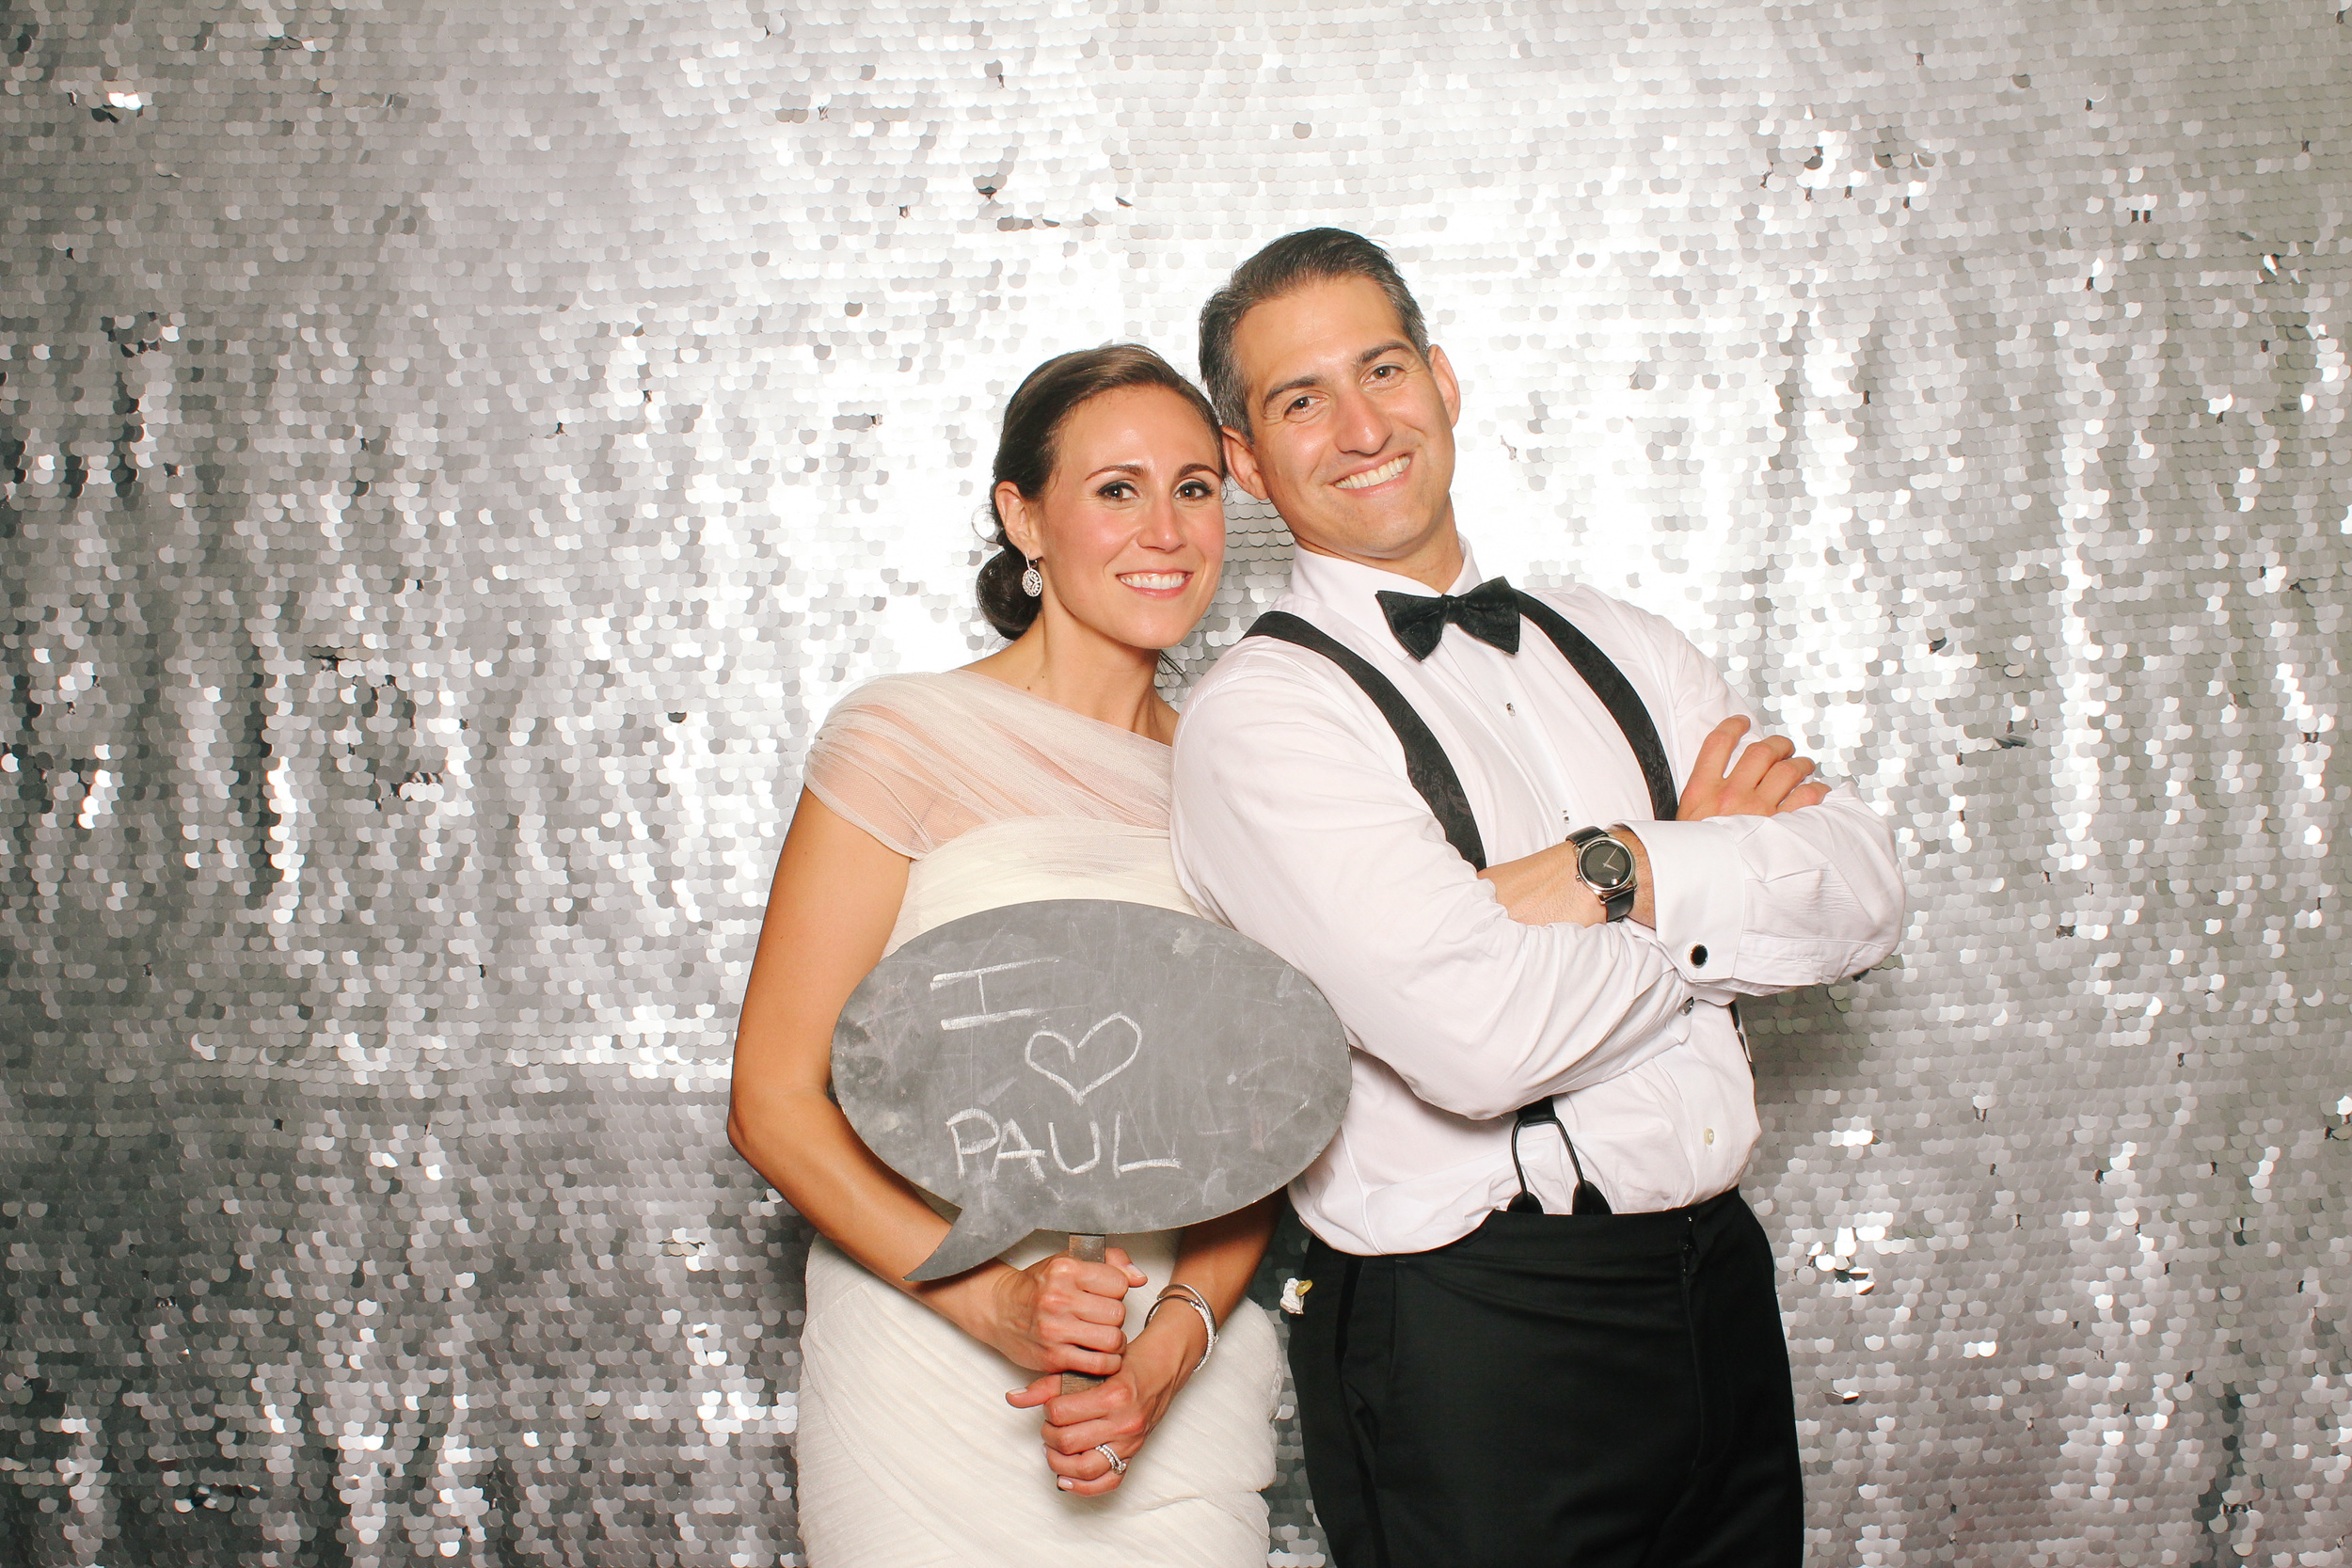 00213-Too Much Awesomeness Photo Booth in Cleveland-20150606.jpg